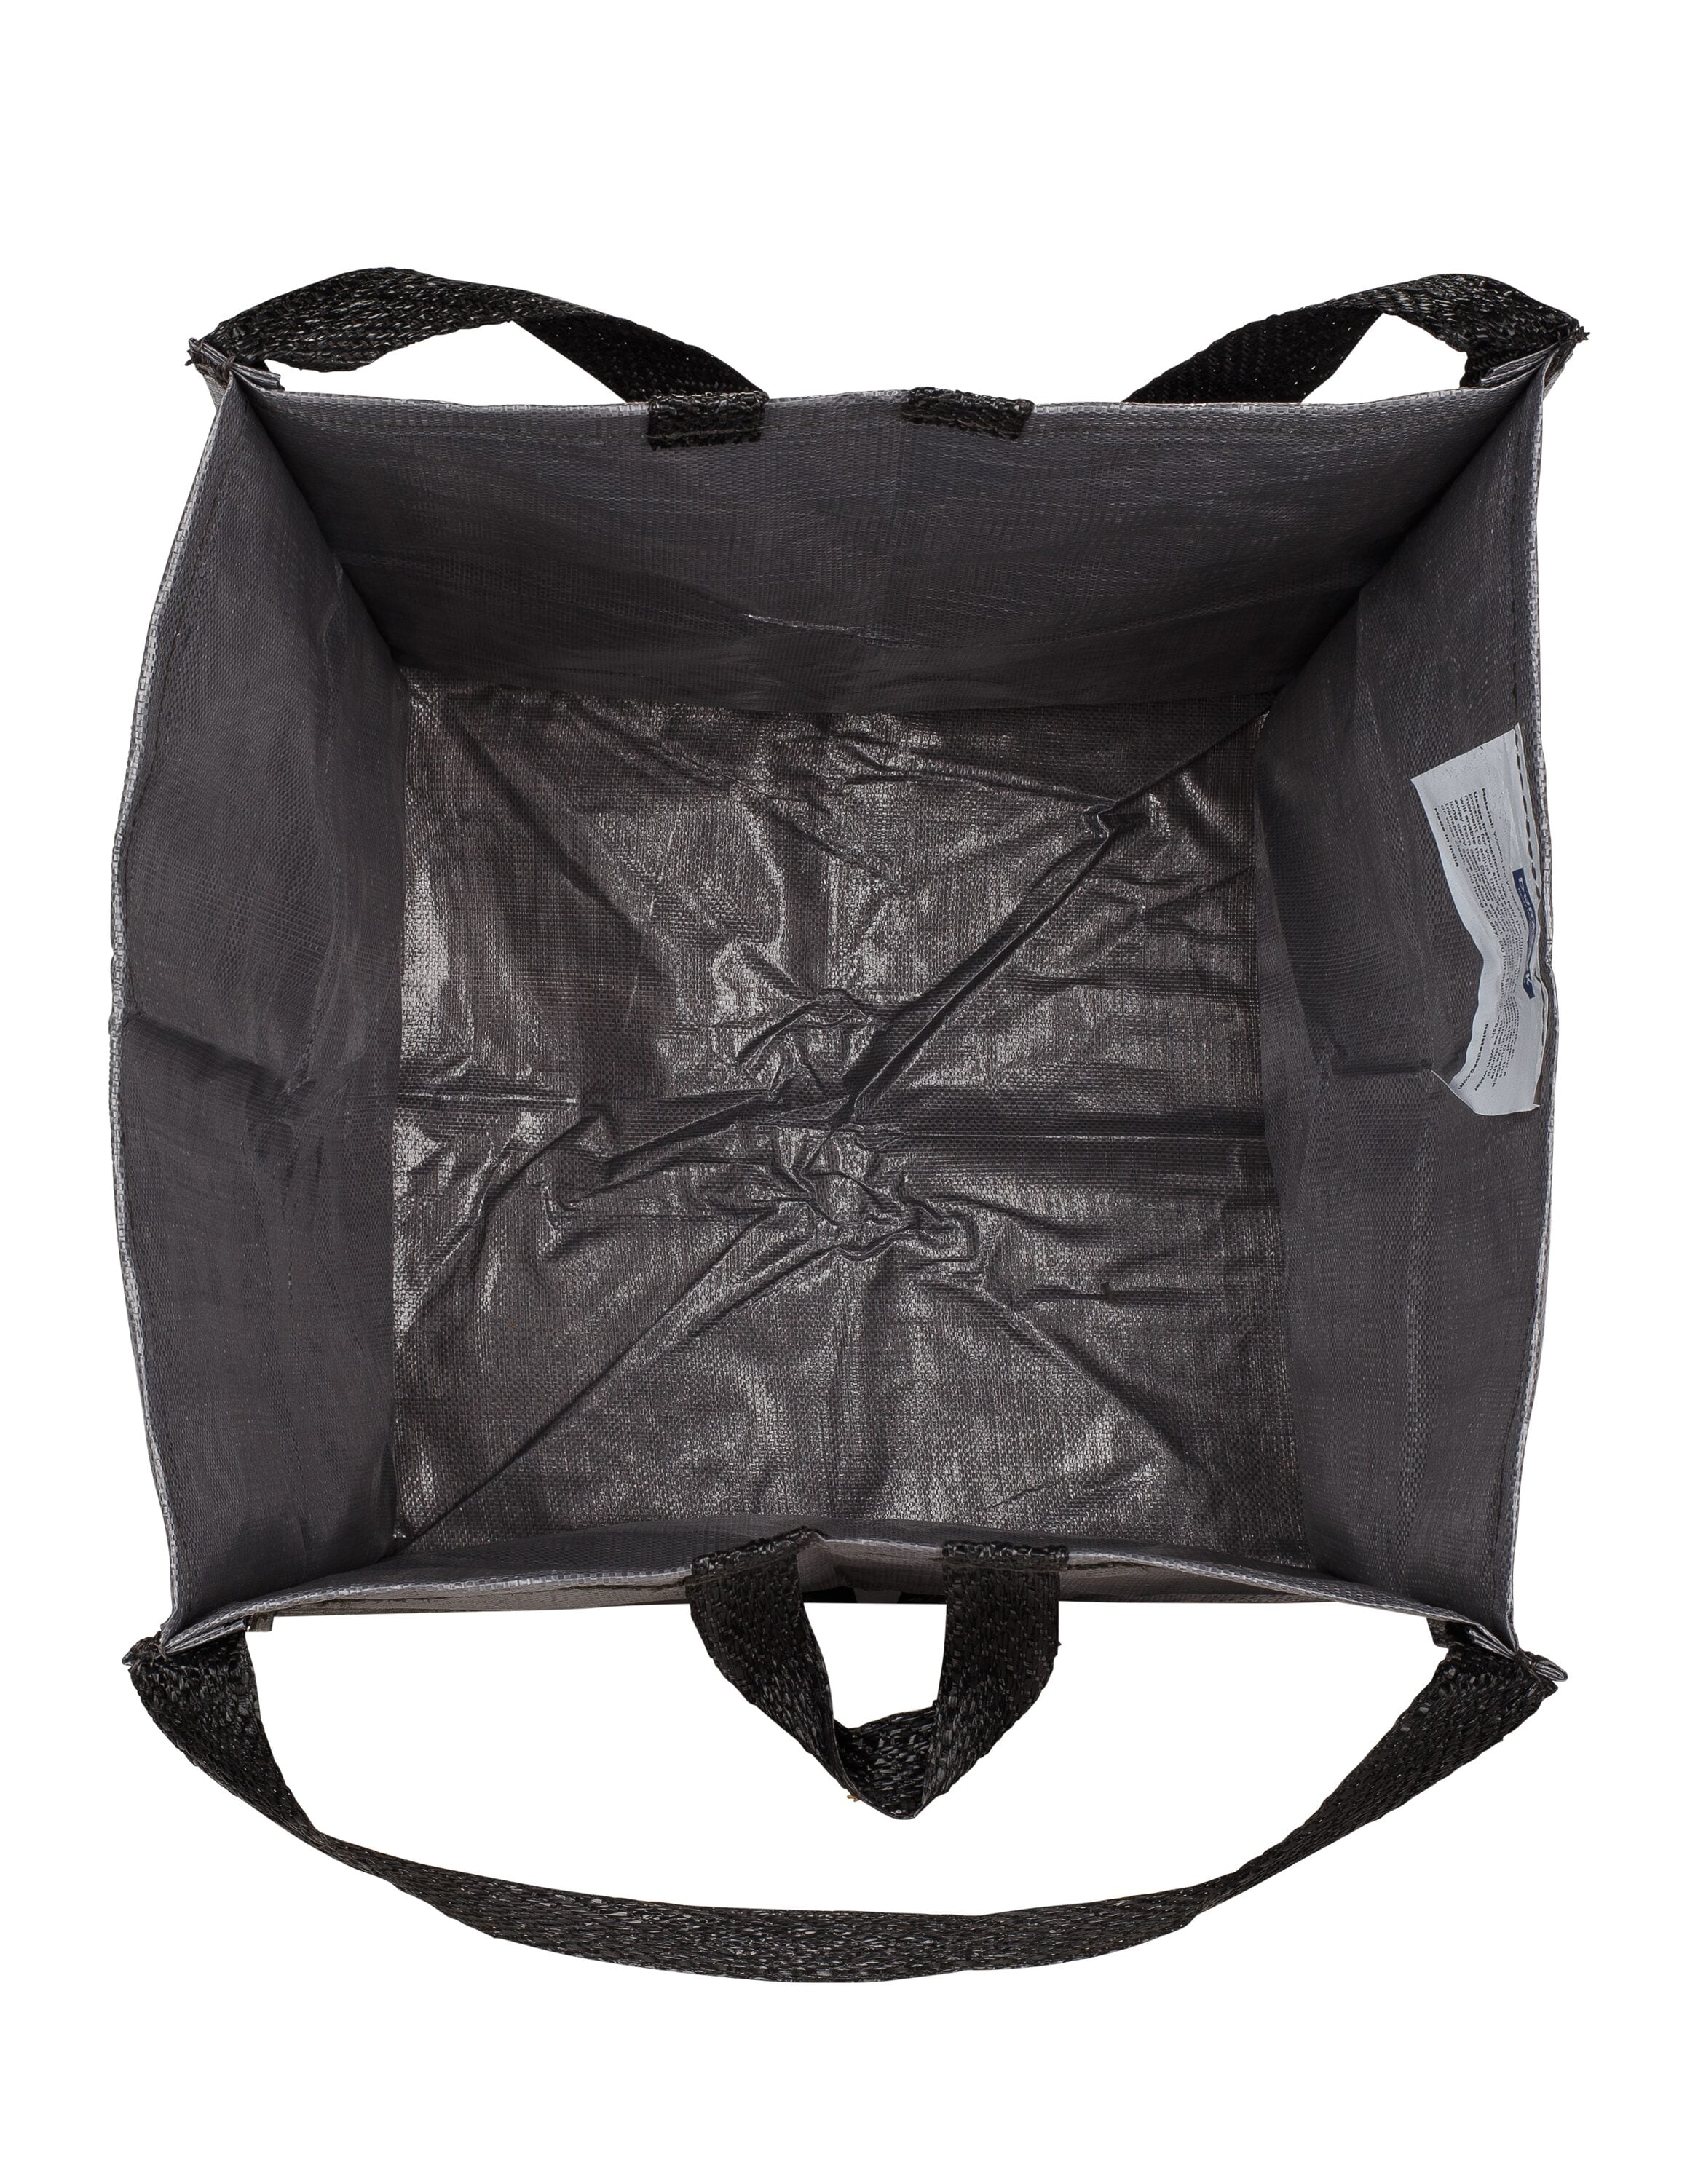 DuraSack 28-in x 20-in Portable Trash Bag Container in the Lawn & Trash ...